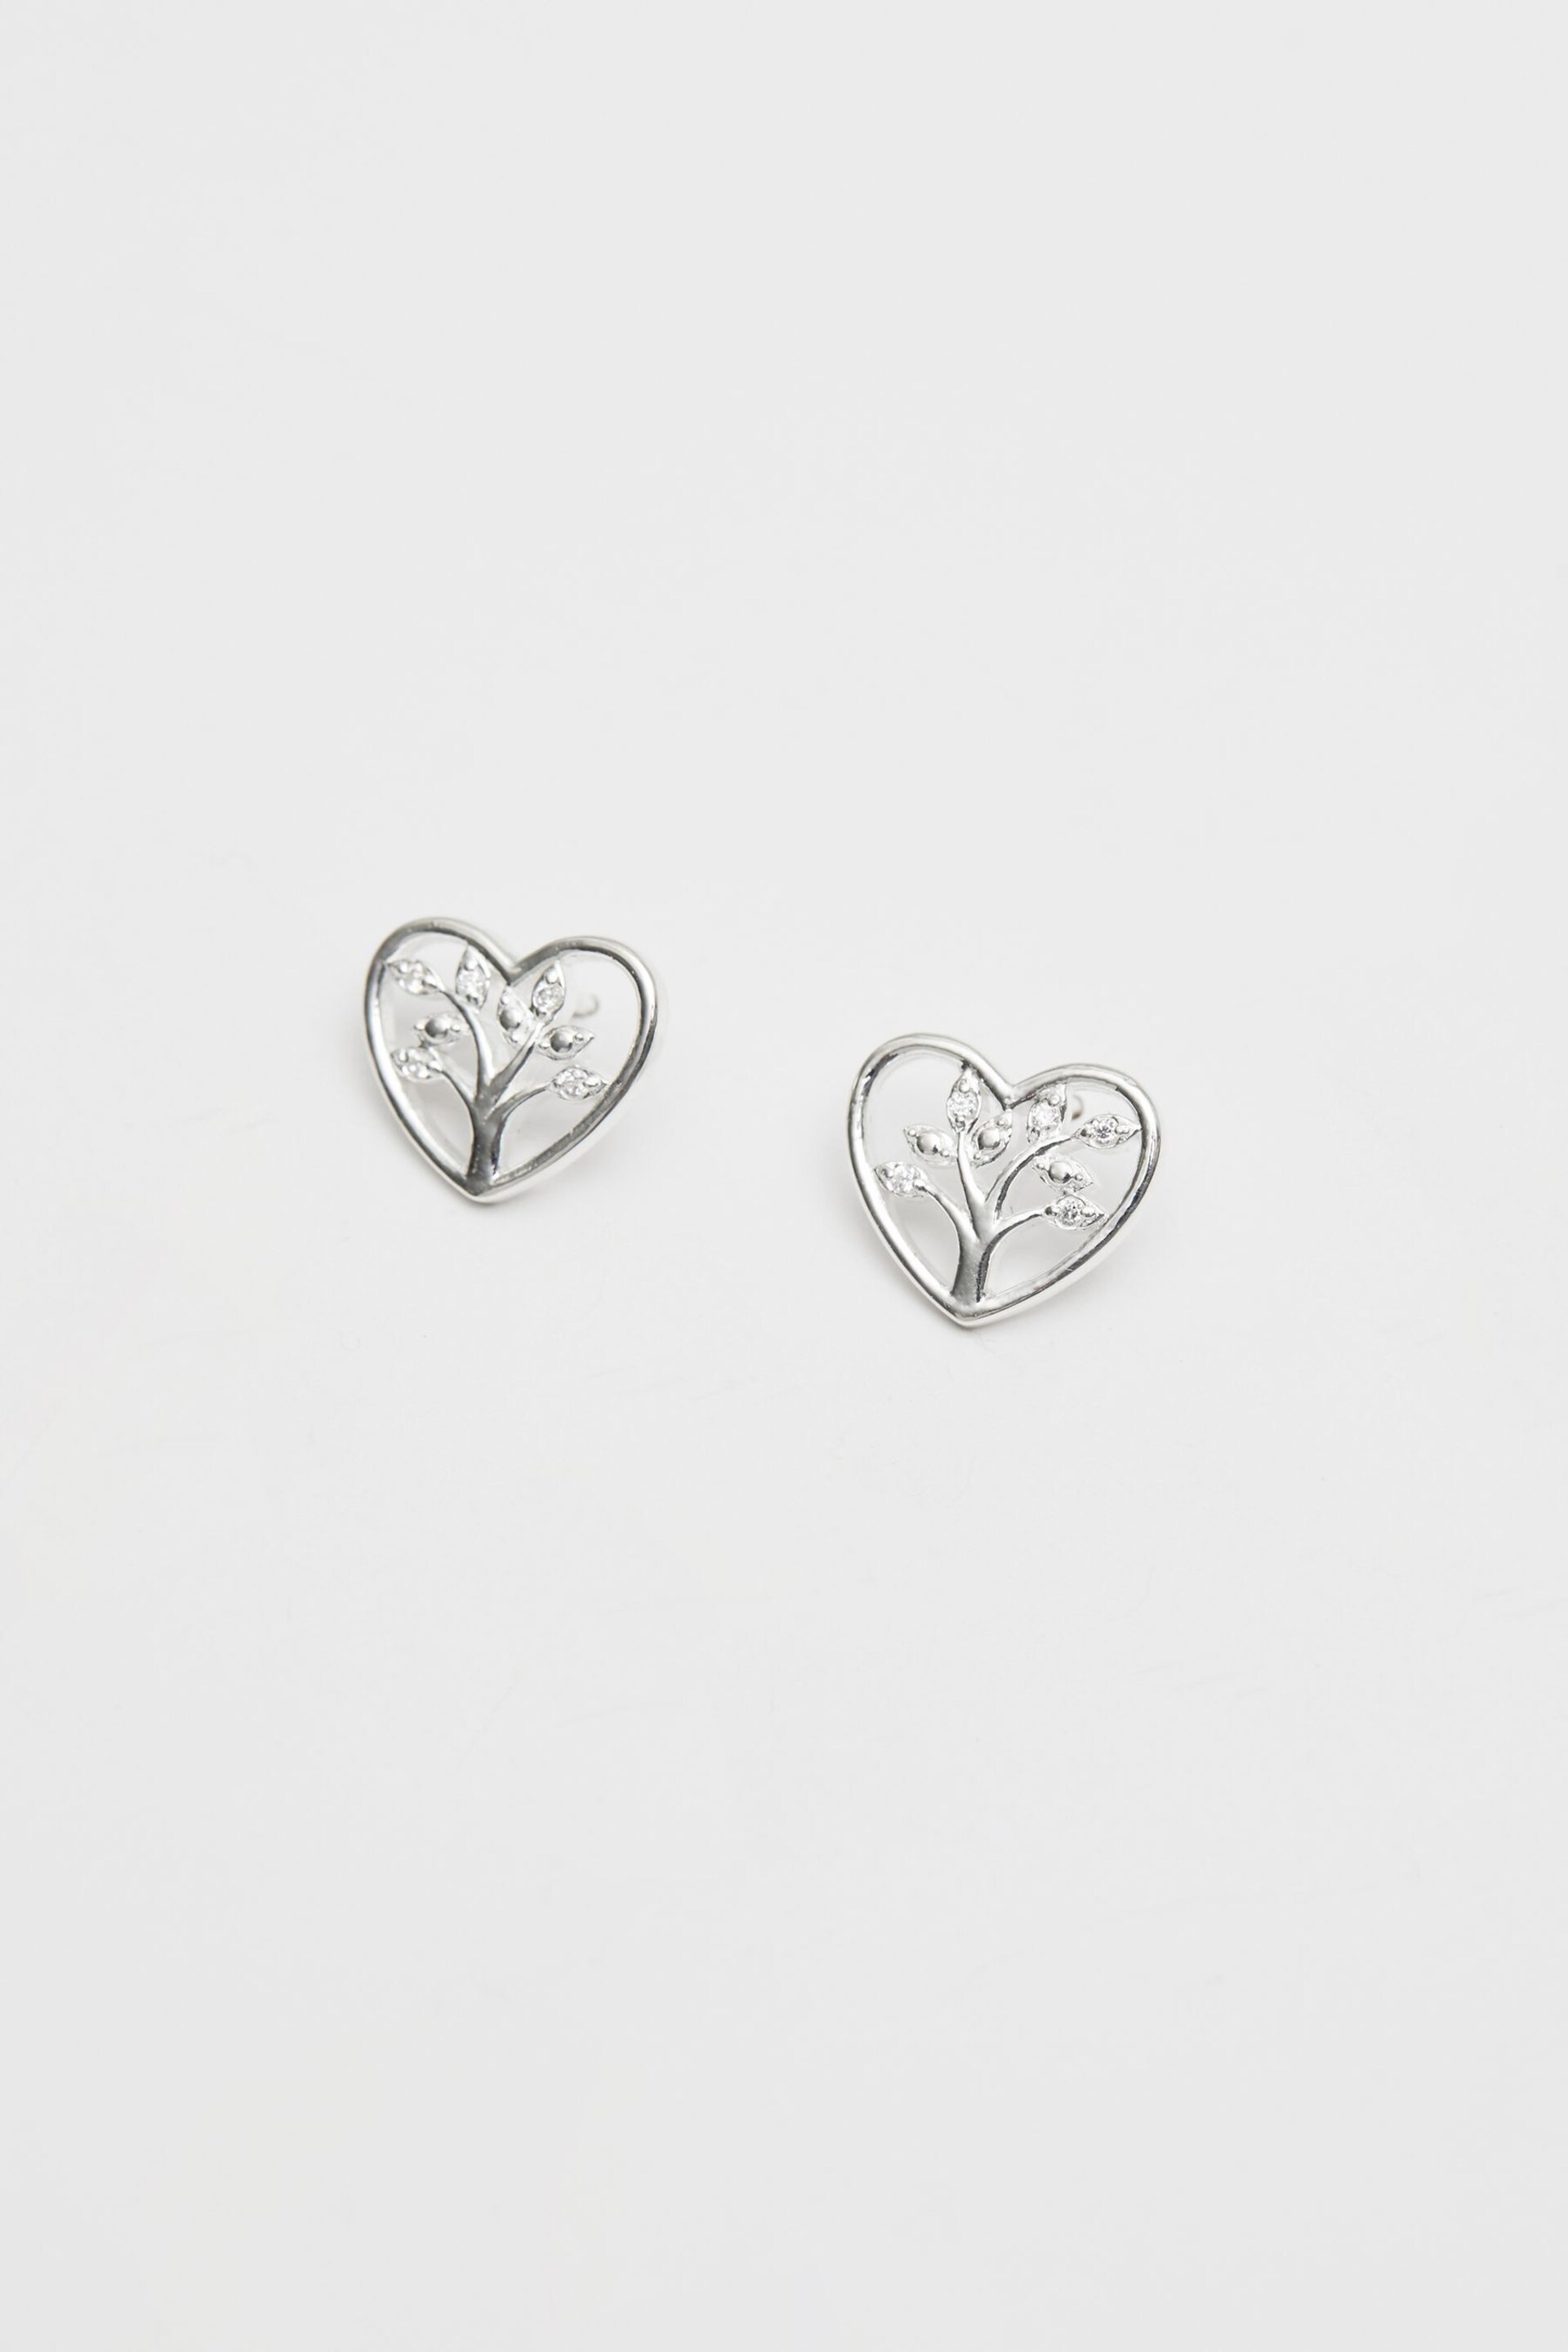 Simply Silver Sterling Silver Tone 925 Tree of Love Heart Stud Earrings - Image 1 of 3